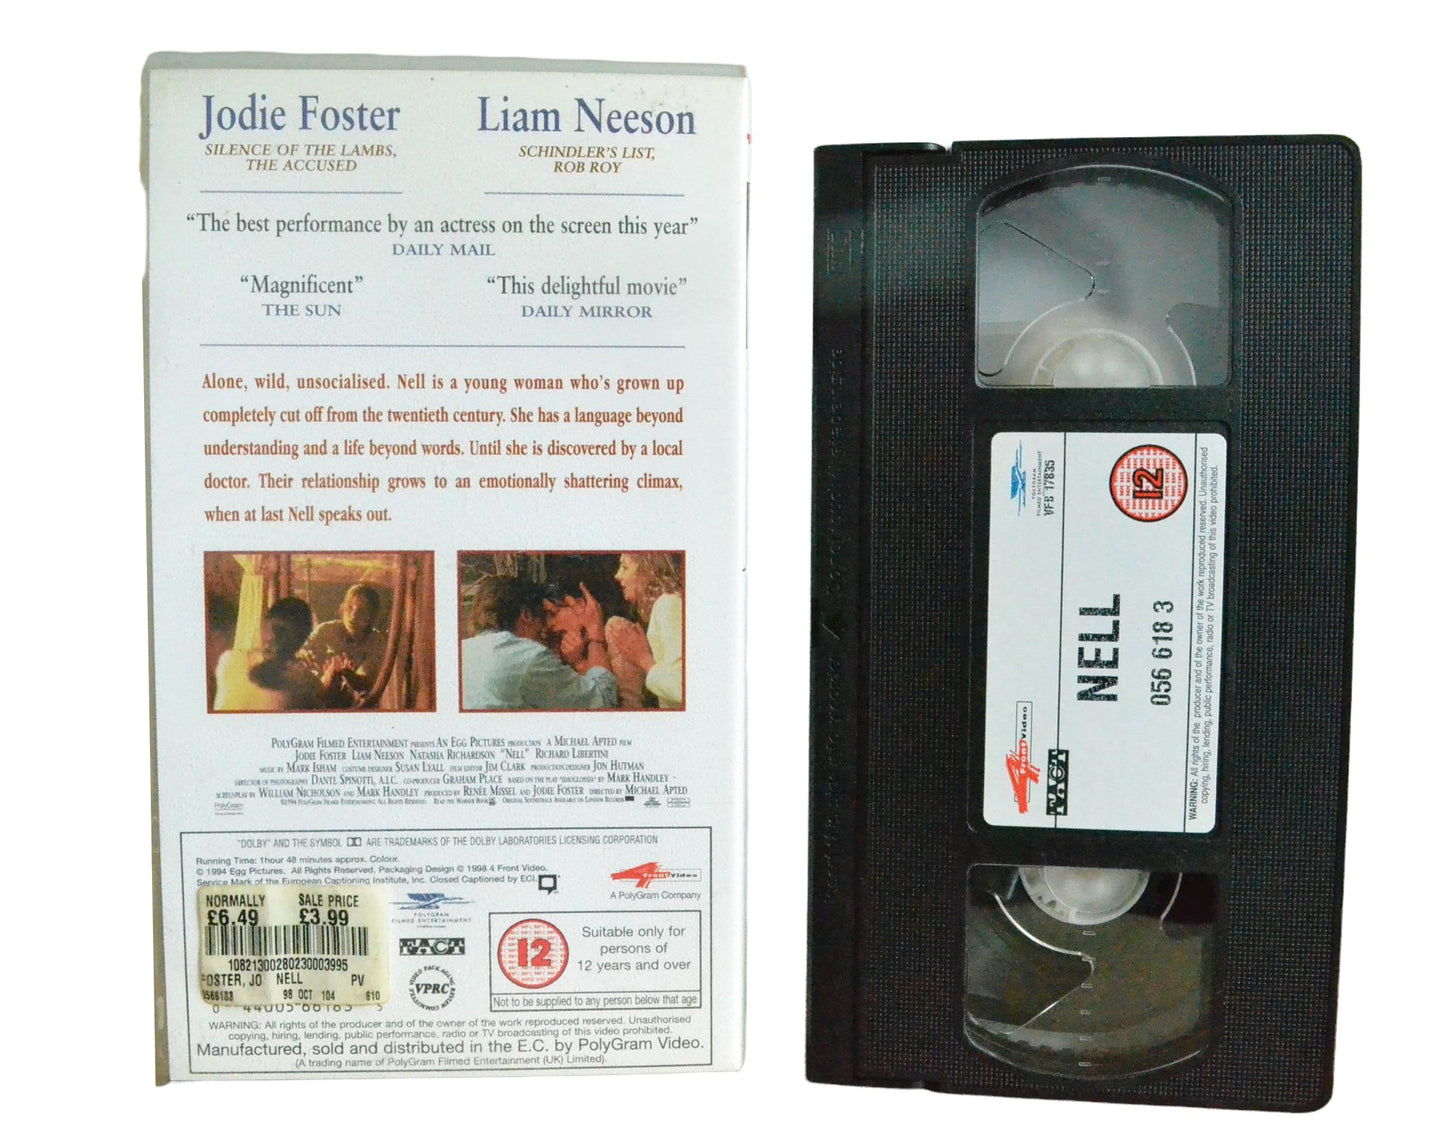 Nell - Language Beyond Understanding, Life Beyond Words... - Jodie Foster - 4Front Video - Vintage - Pal VHS-